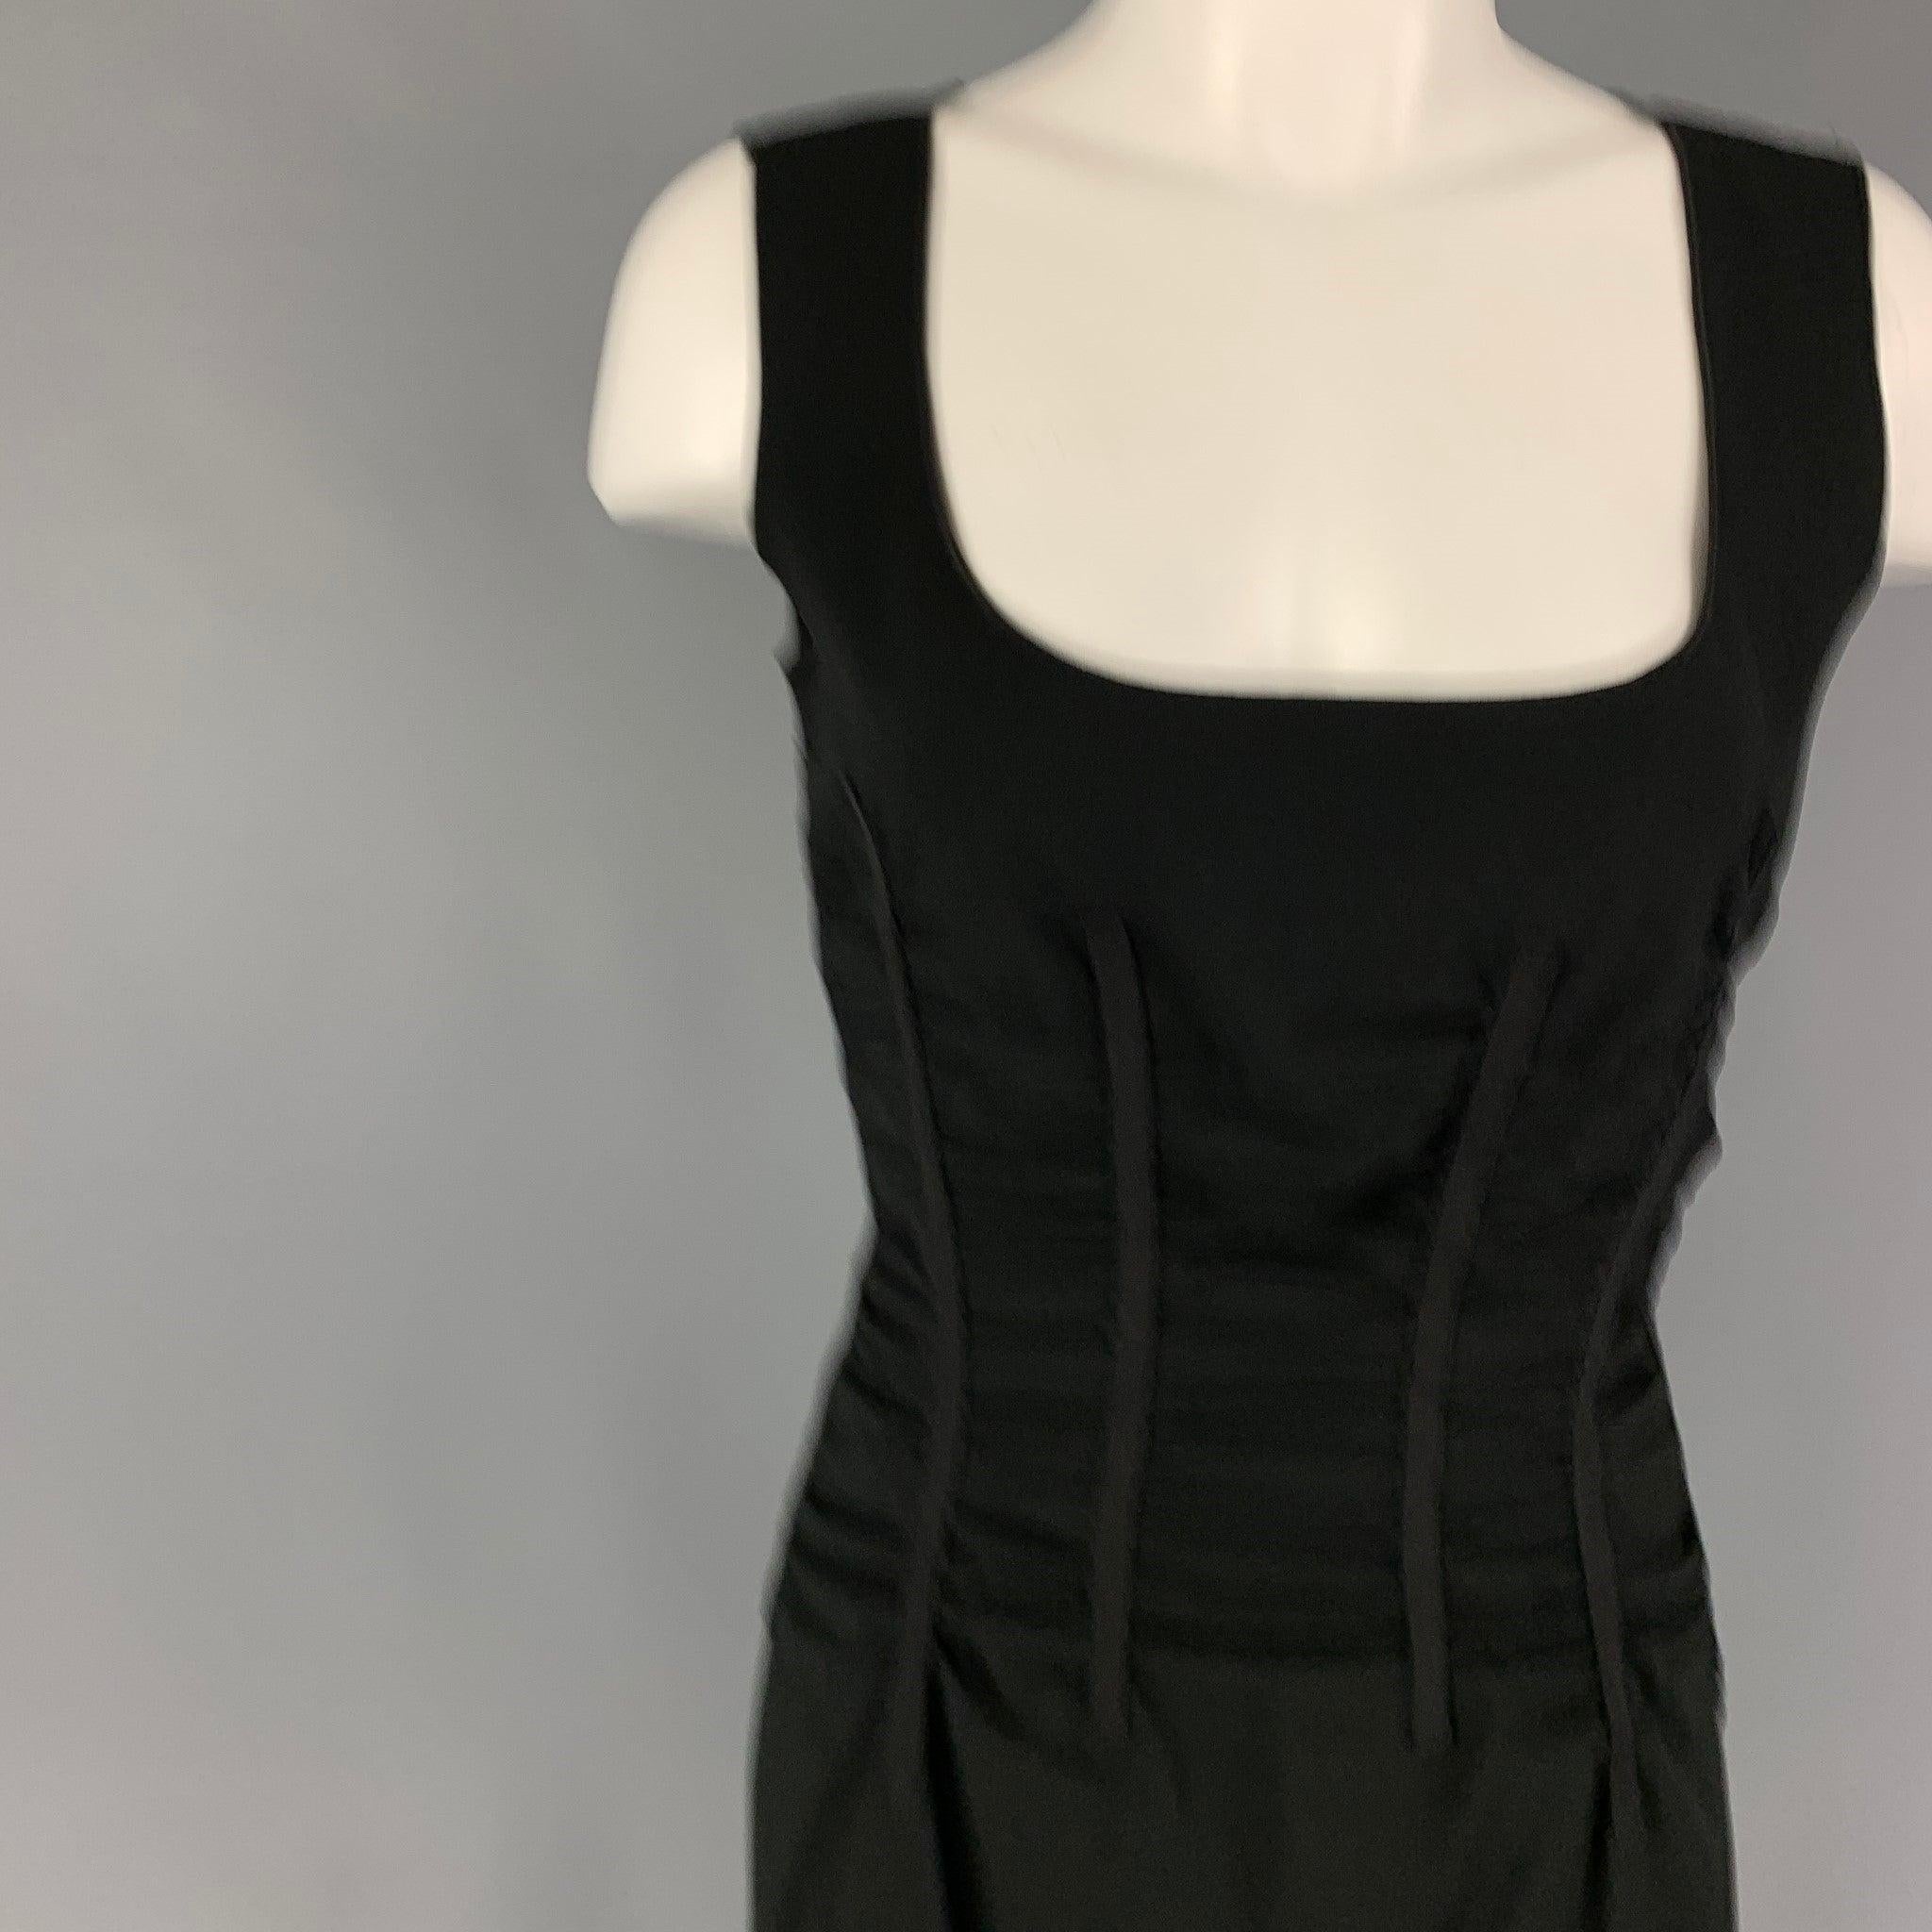 DOLCE & GABBANA cocktail dress comes in a black acetate blend with a animal print interior featuring 
ruched design, sleeveless, and a back zip up closure.
Very Good
Pre-Owned Condition. 

Marked:  42 

Measurements: 
 
Shoulder:
15 inches Bust: 30